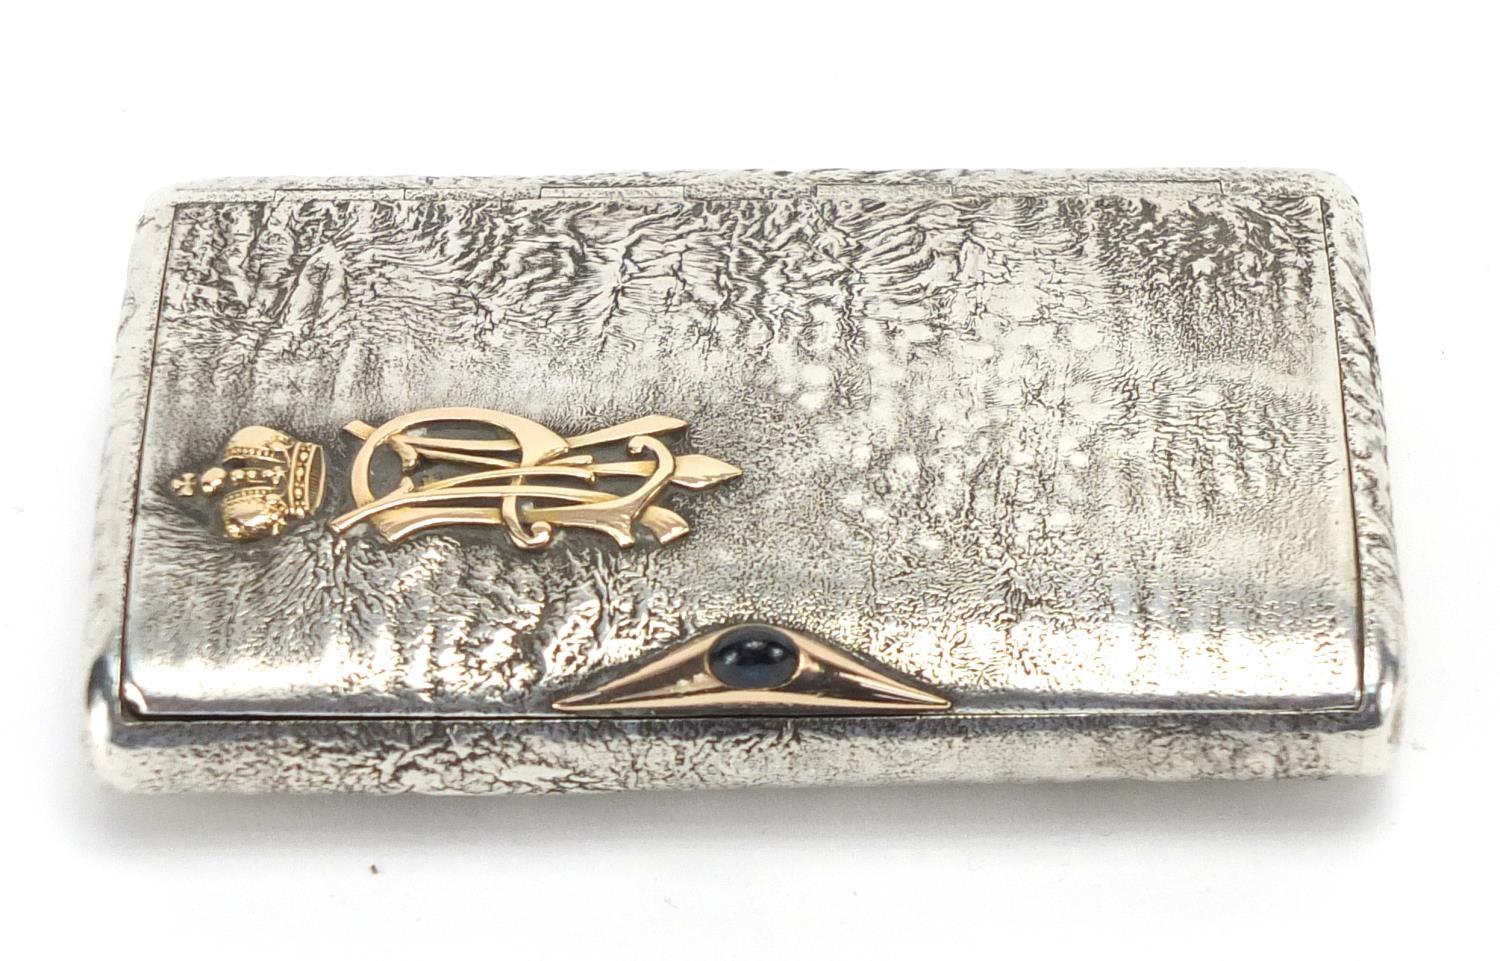 Russian silver Samorodok with applied gold lettering, impressed marks 84 AE to the interior, - Image 3 of 9